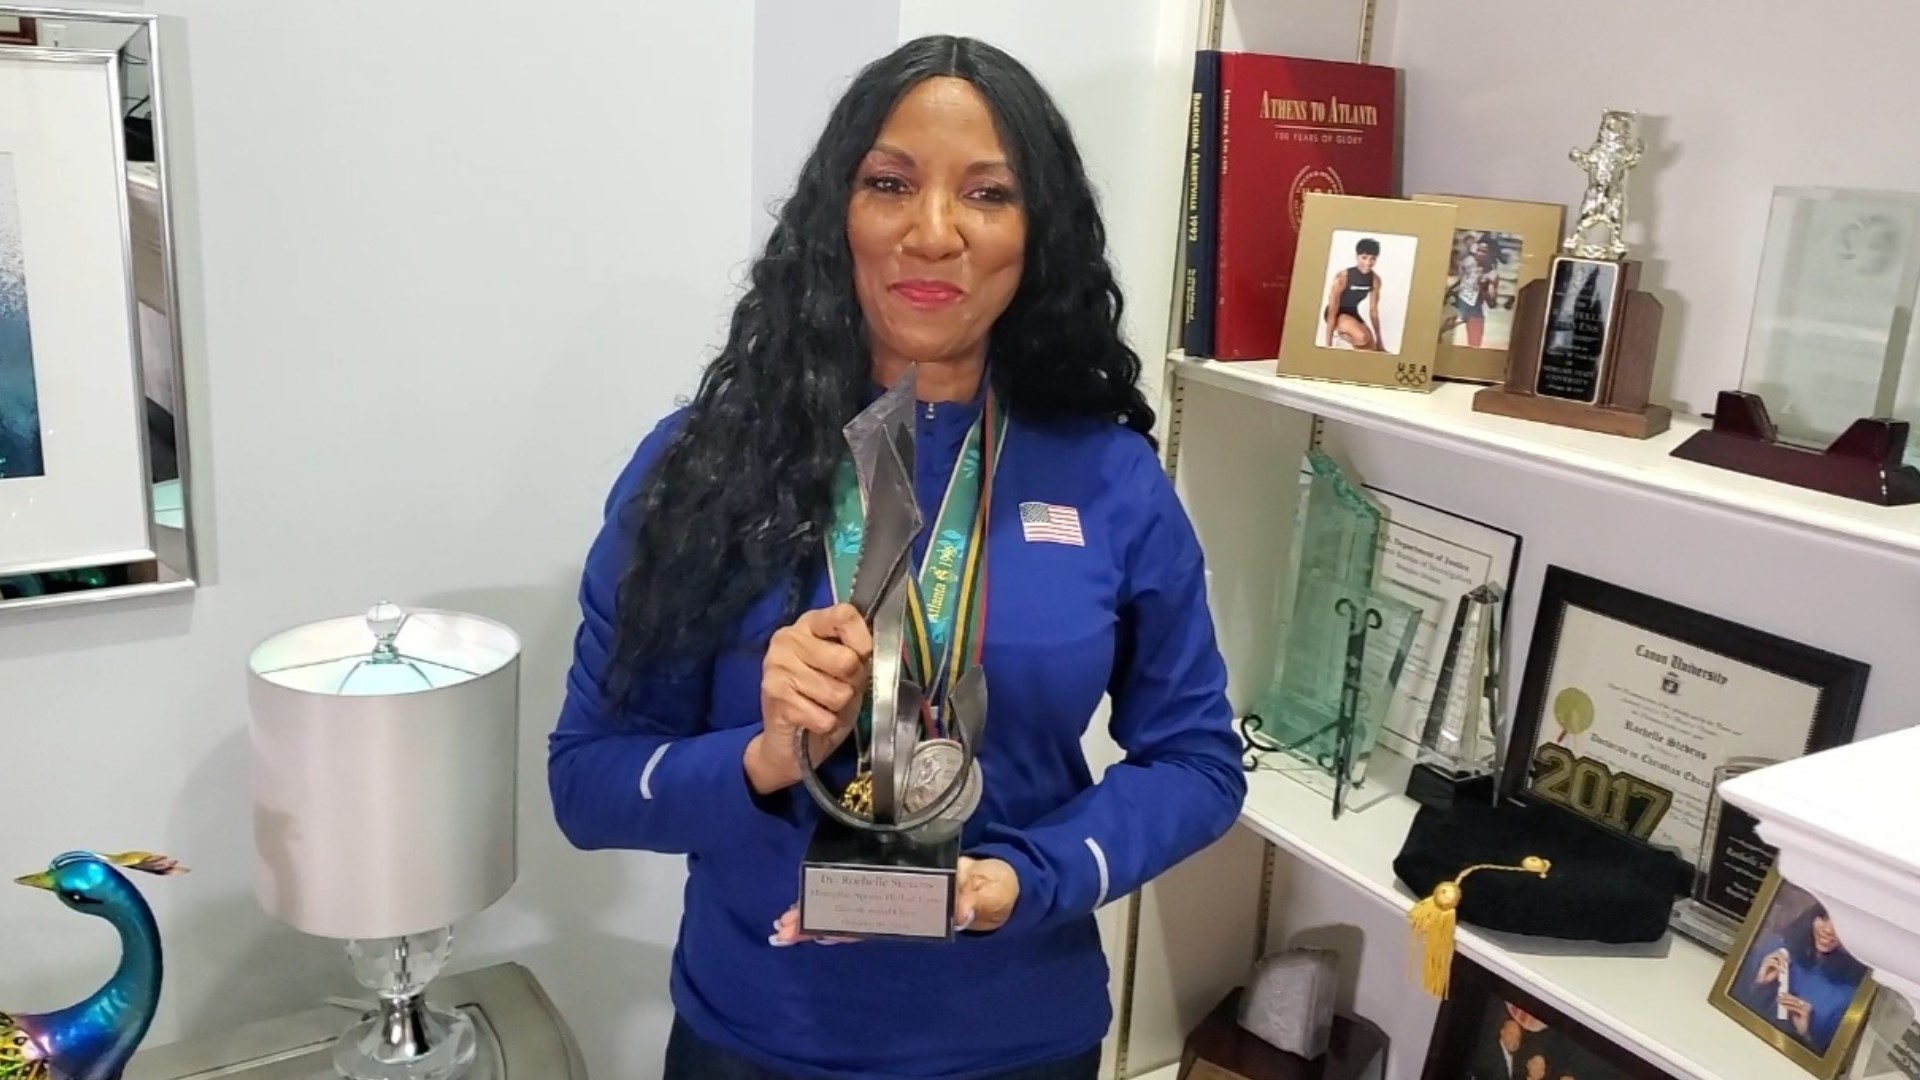 The Rochelle Stevens Foundation helped more than 30,000 inner city athletes. Stevens is preparing for her annual invitational track meet this summer in Memphis.